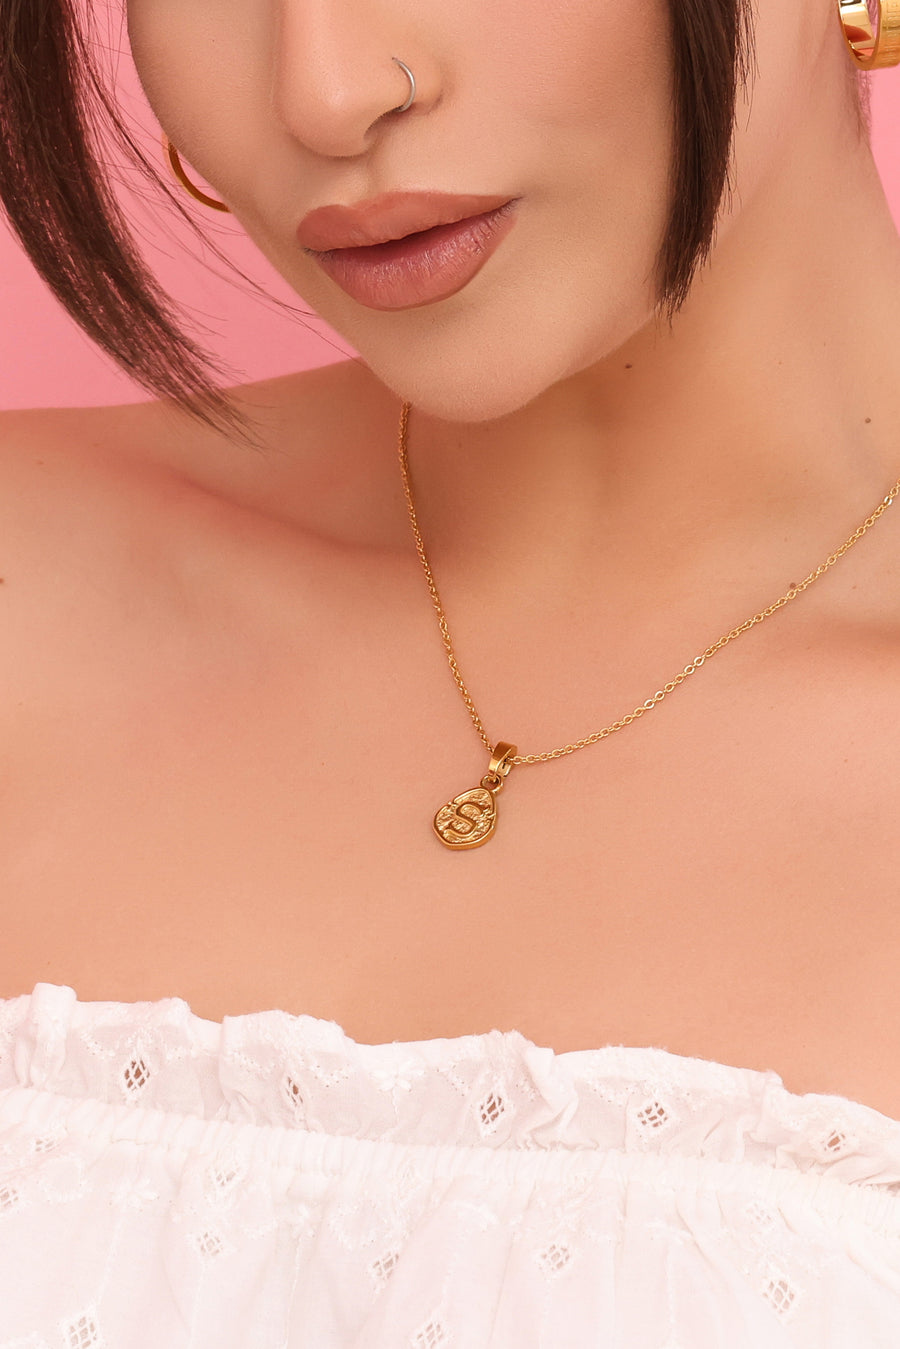 "T" Tberfil Letter Pendant with Petite Adjustable Chain Necklace